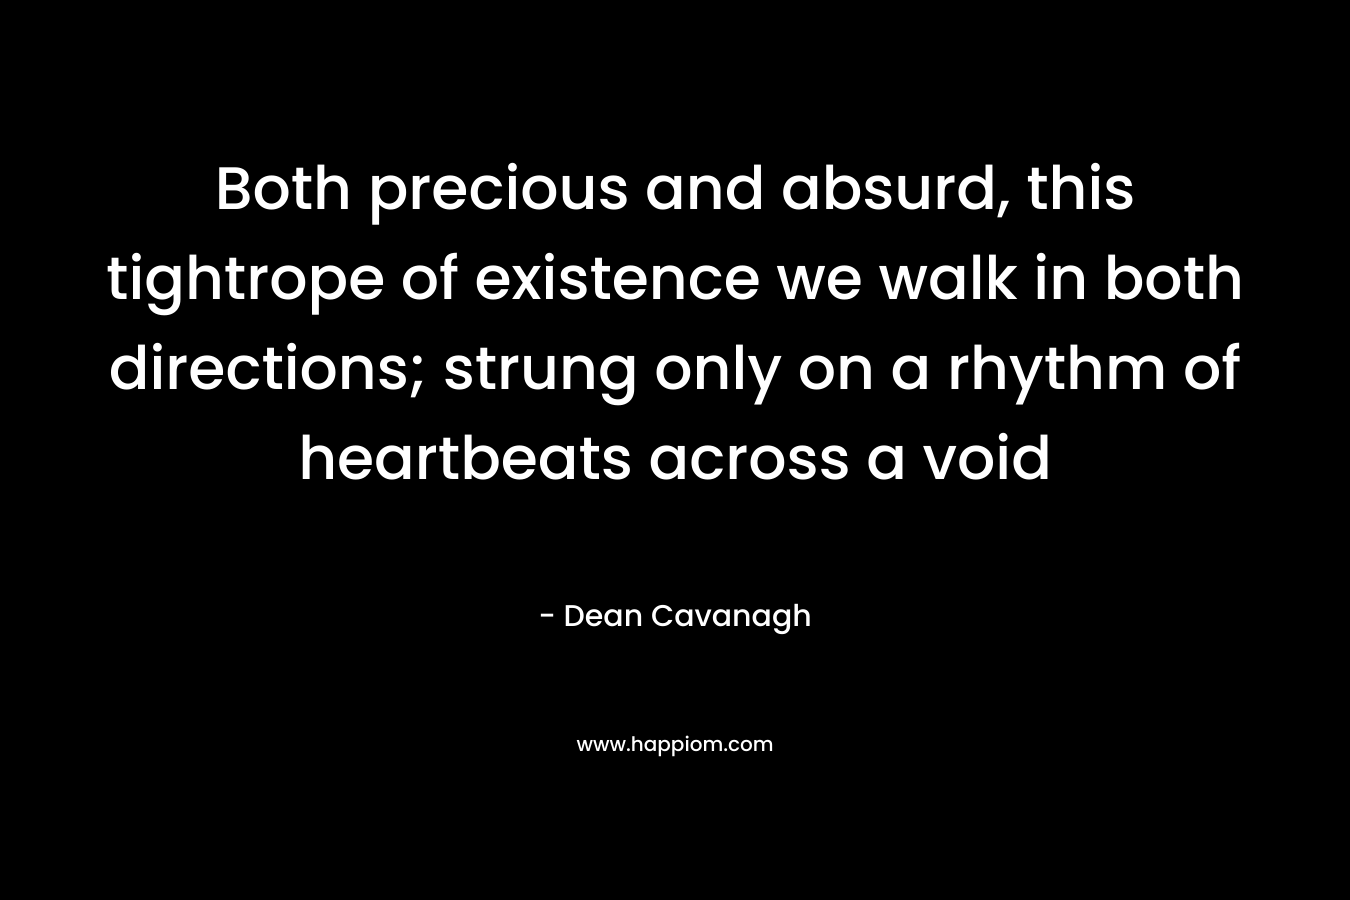 Both precious and absurd, this tightrope of existence we walk in both directions; strung only on a rhythm of heartbeats across a void – Dean Cavanagh